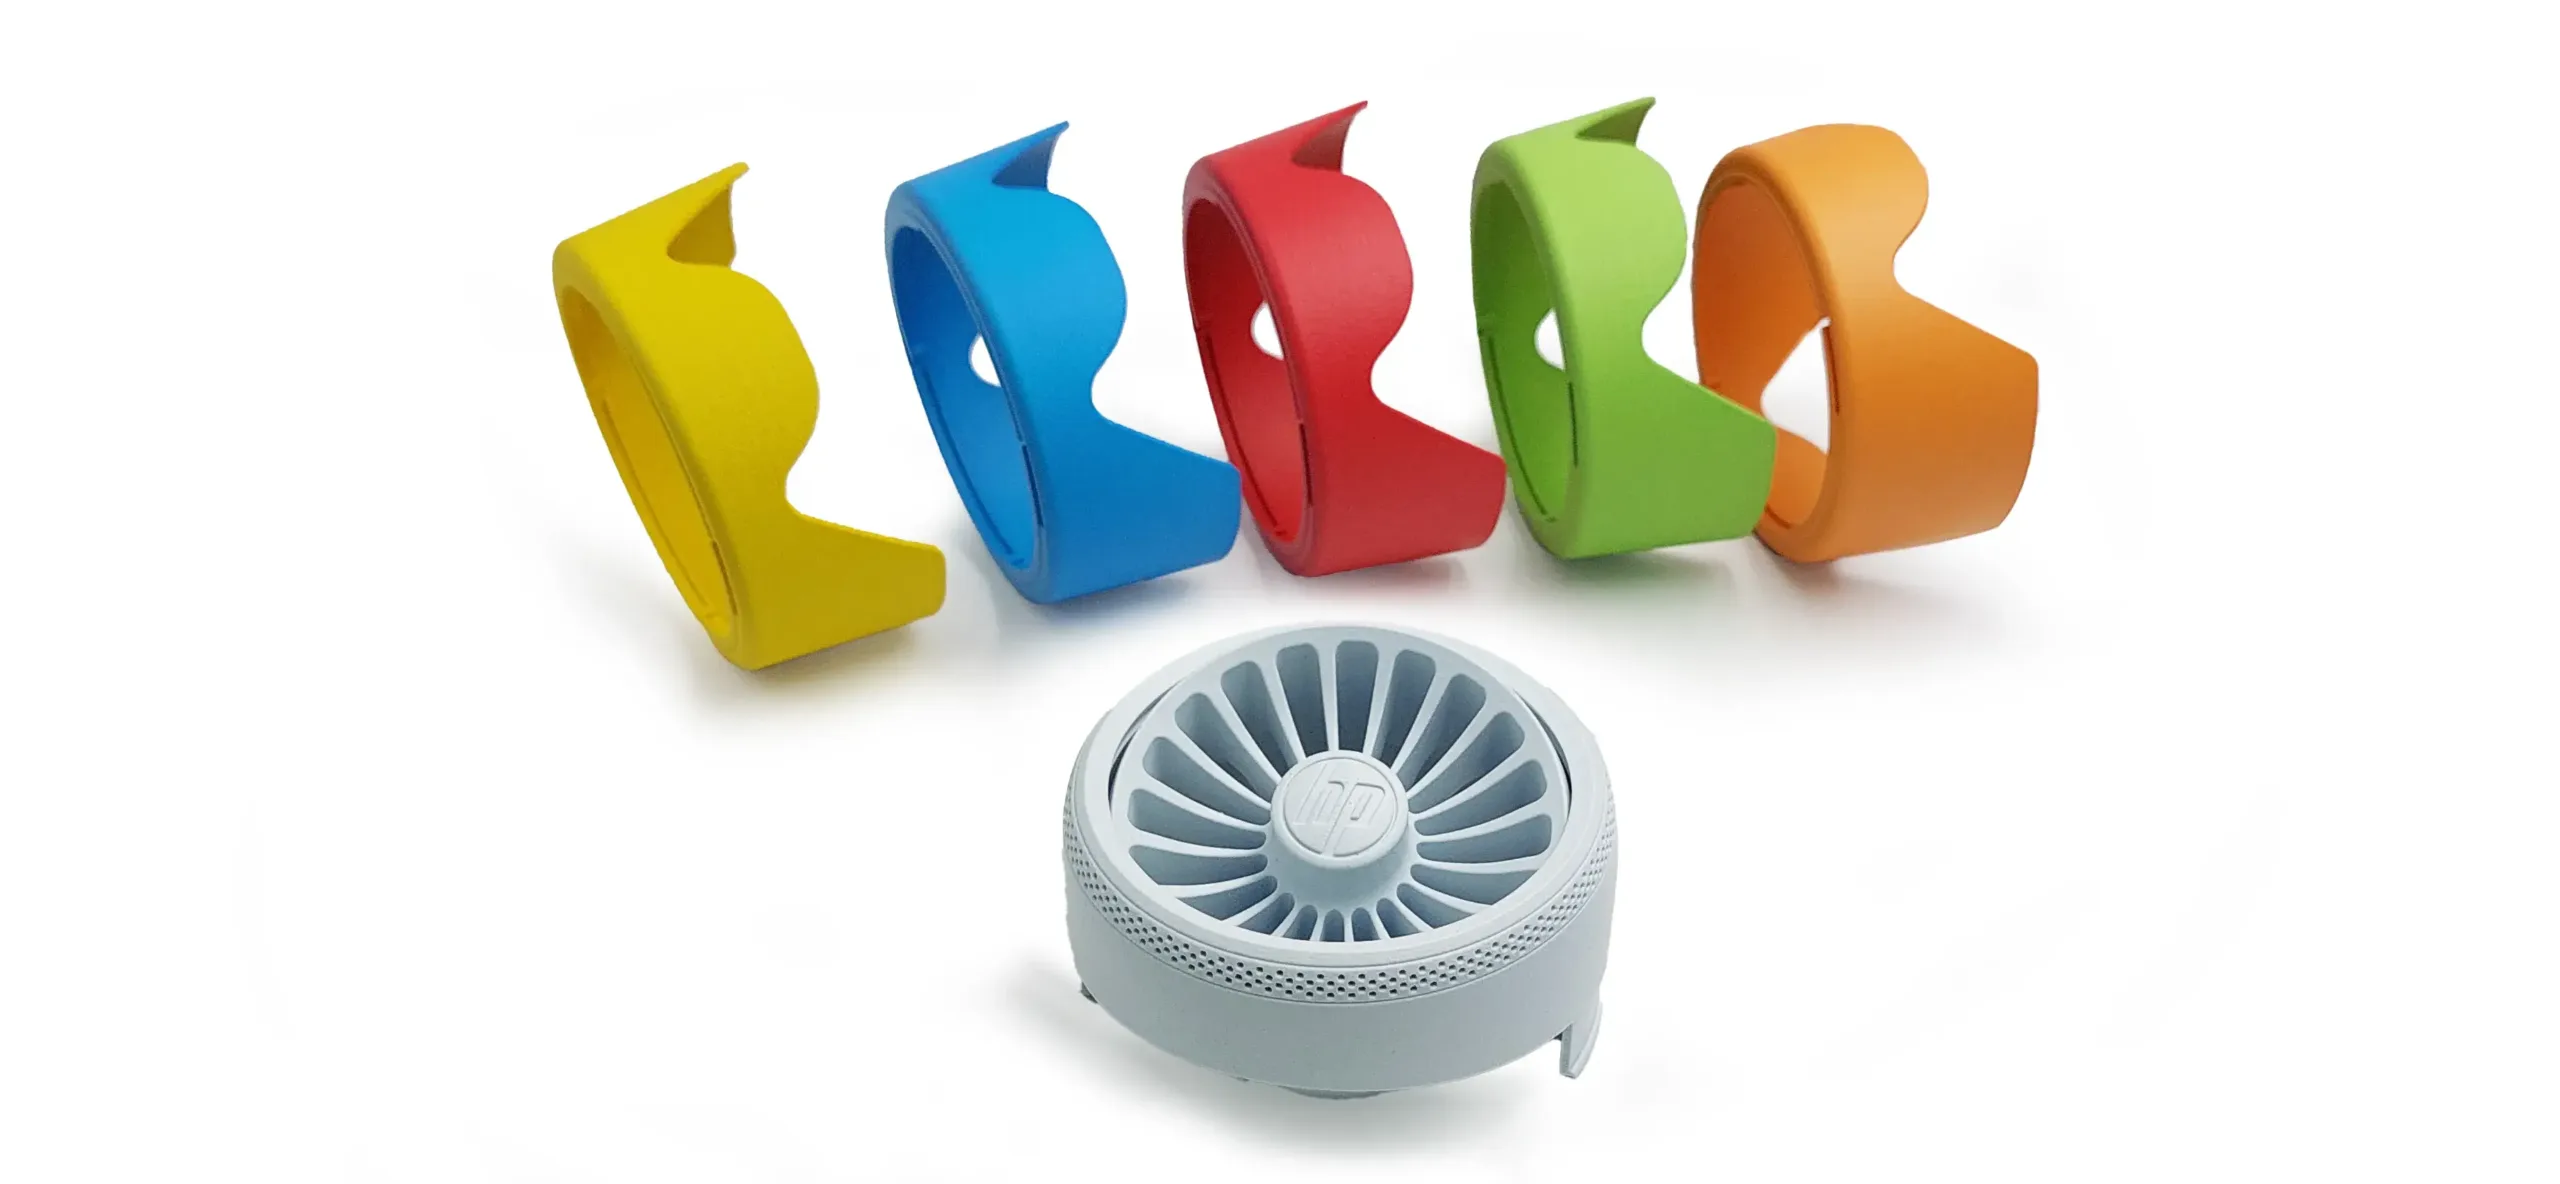 3d printed white PA 12W fan with yellow, blue, red, green and orange colored frame